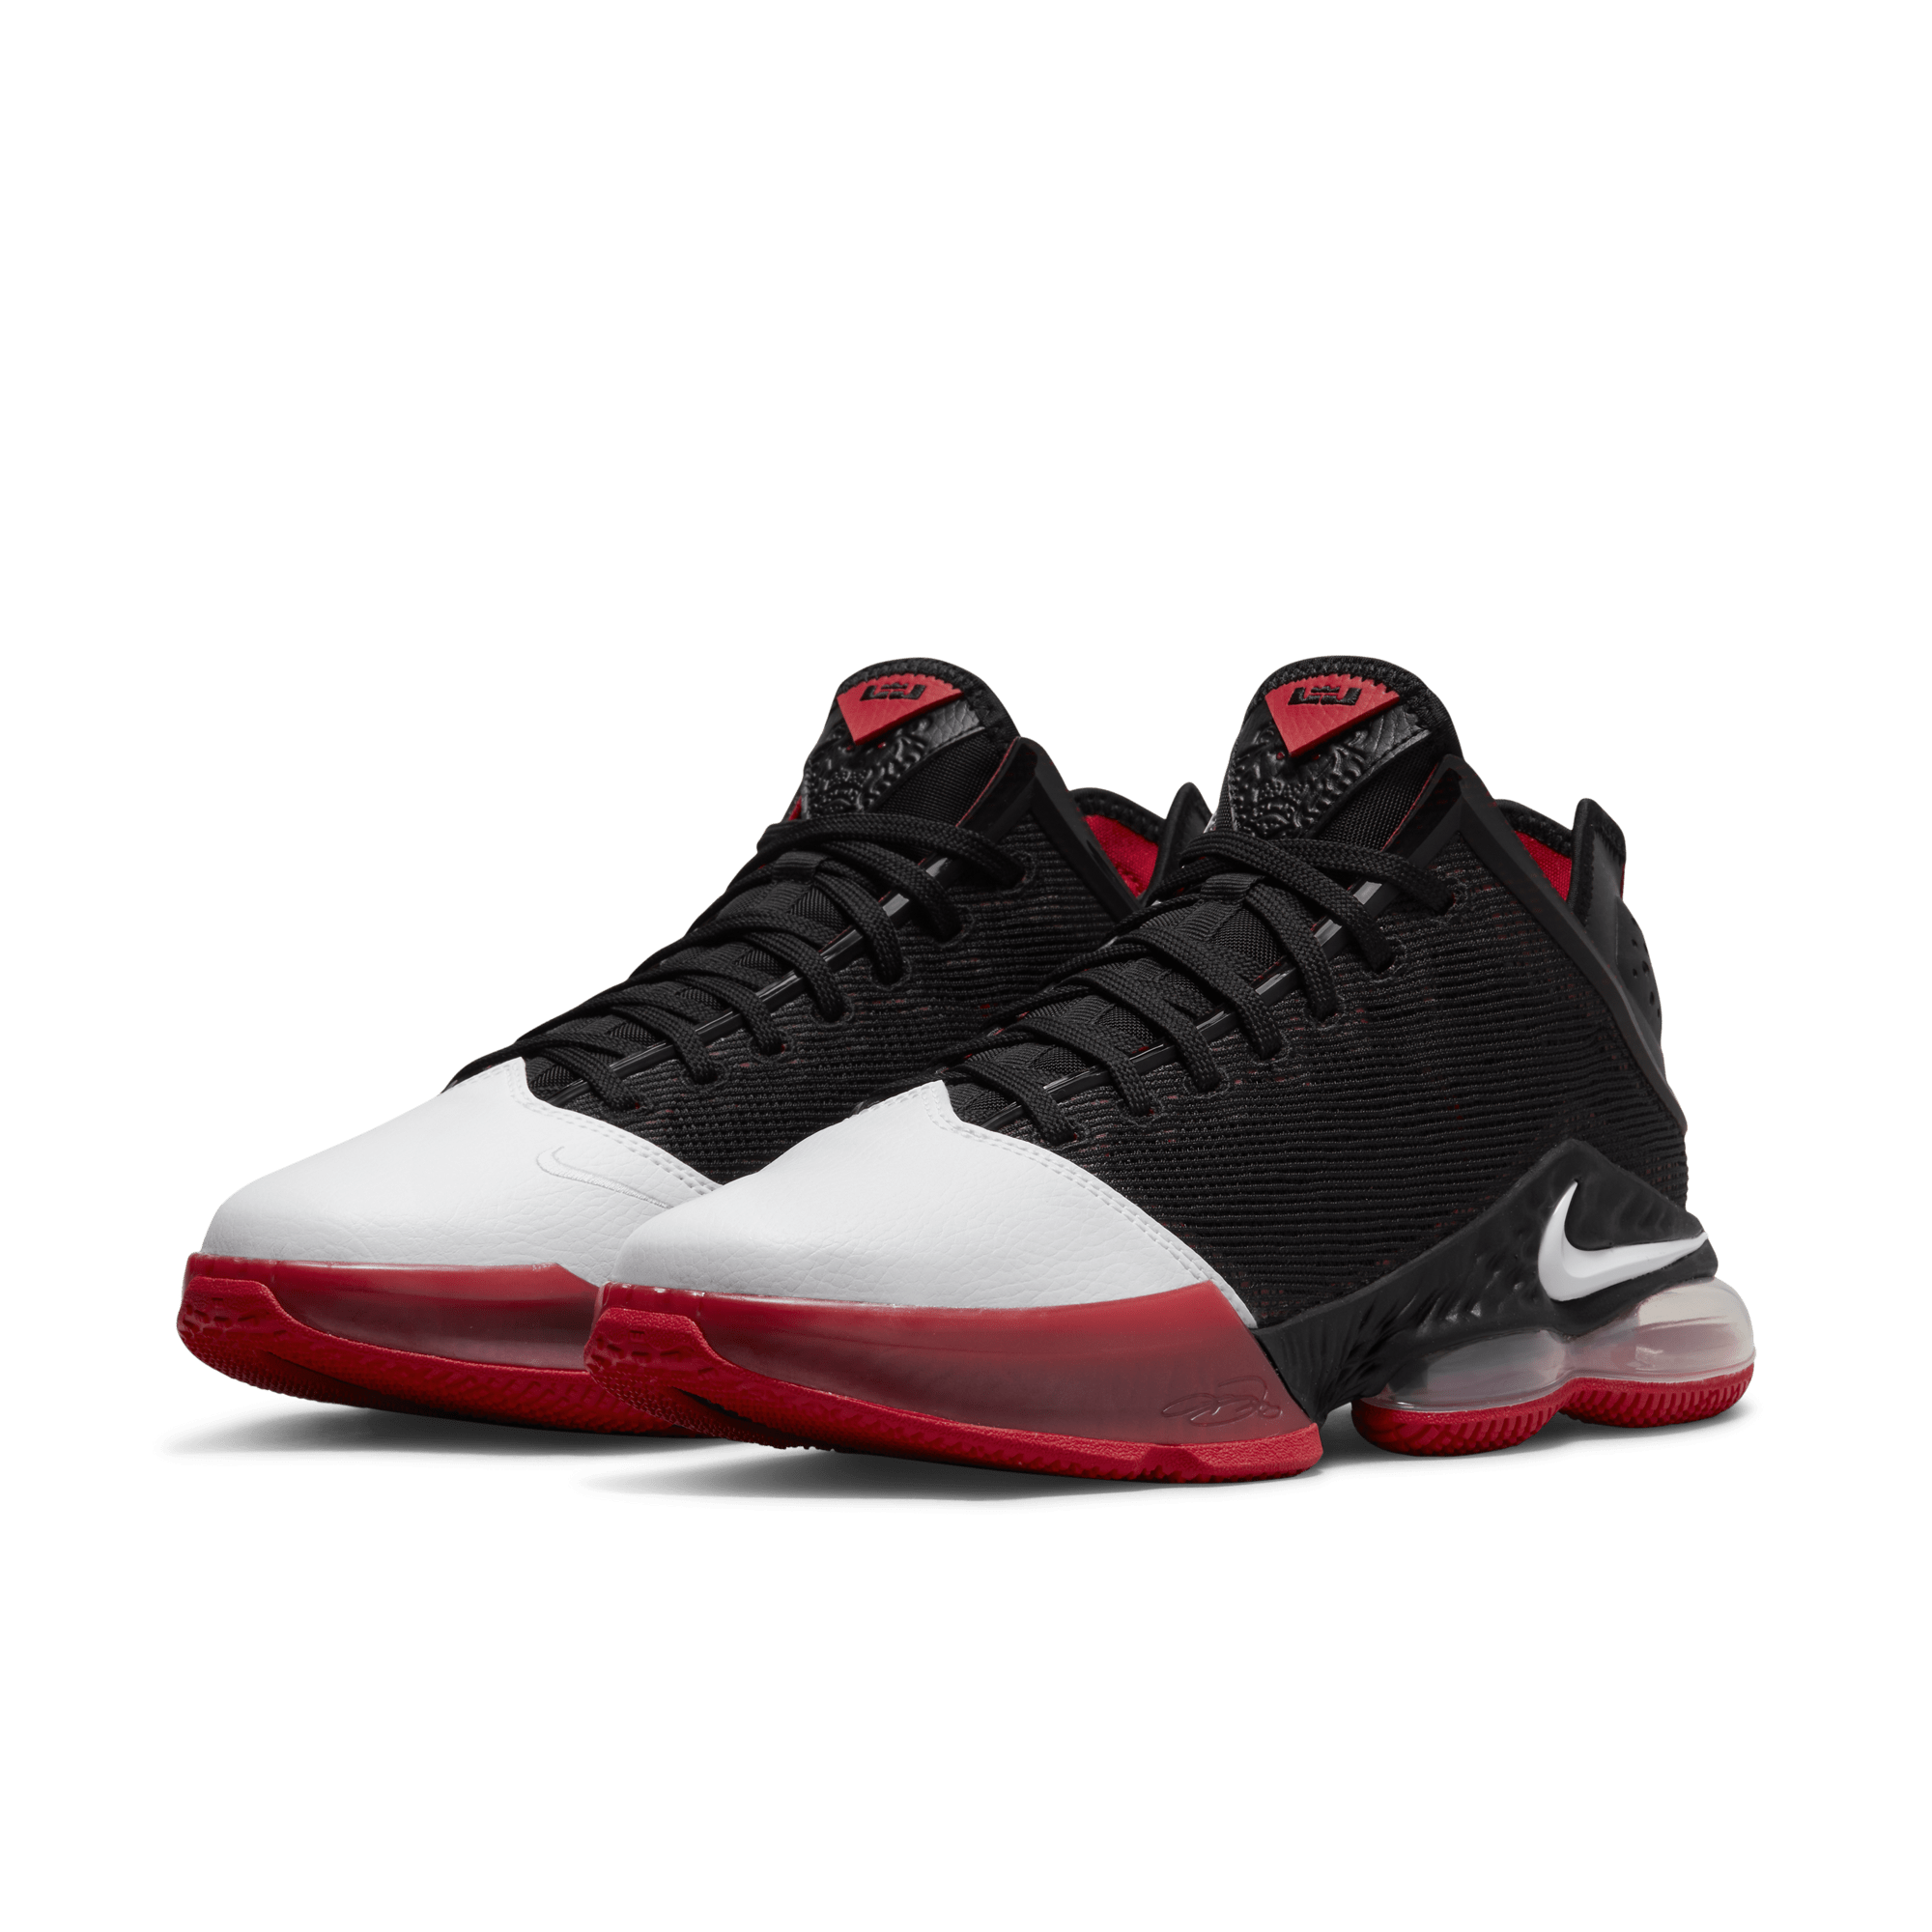 Nike Lebron 19 low VS Lebron 18 Low(WHICH IS BETTER?) 